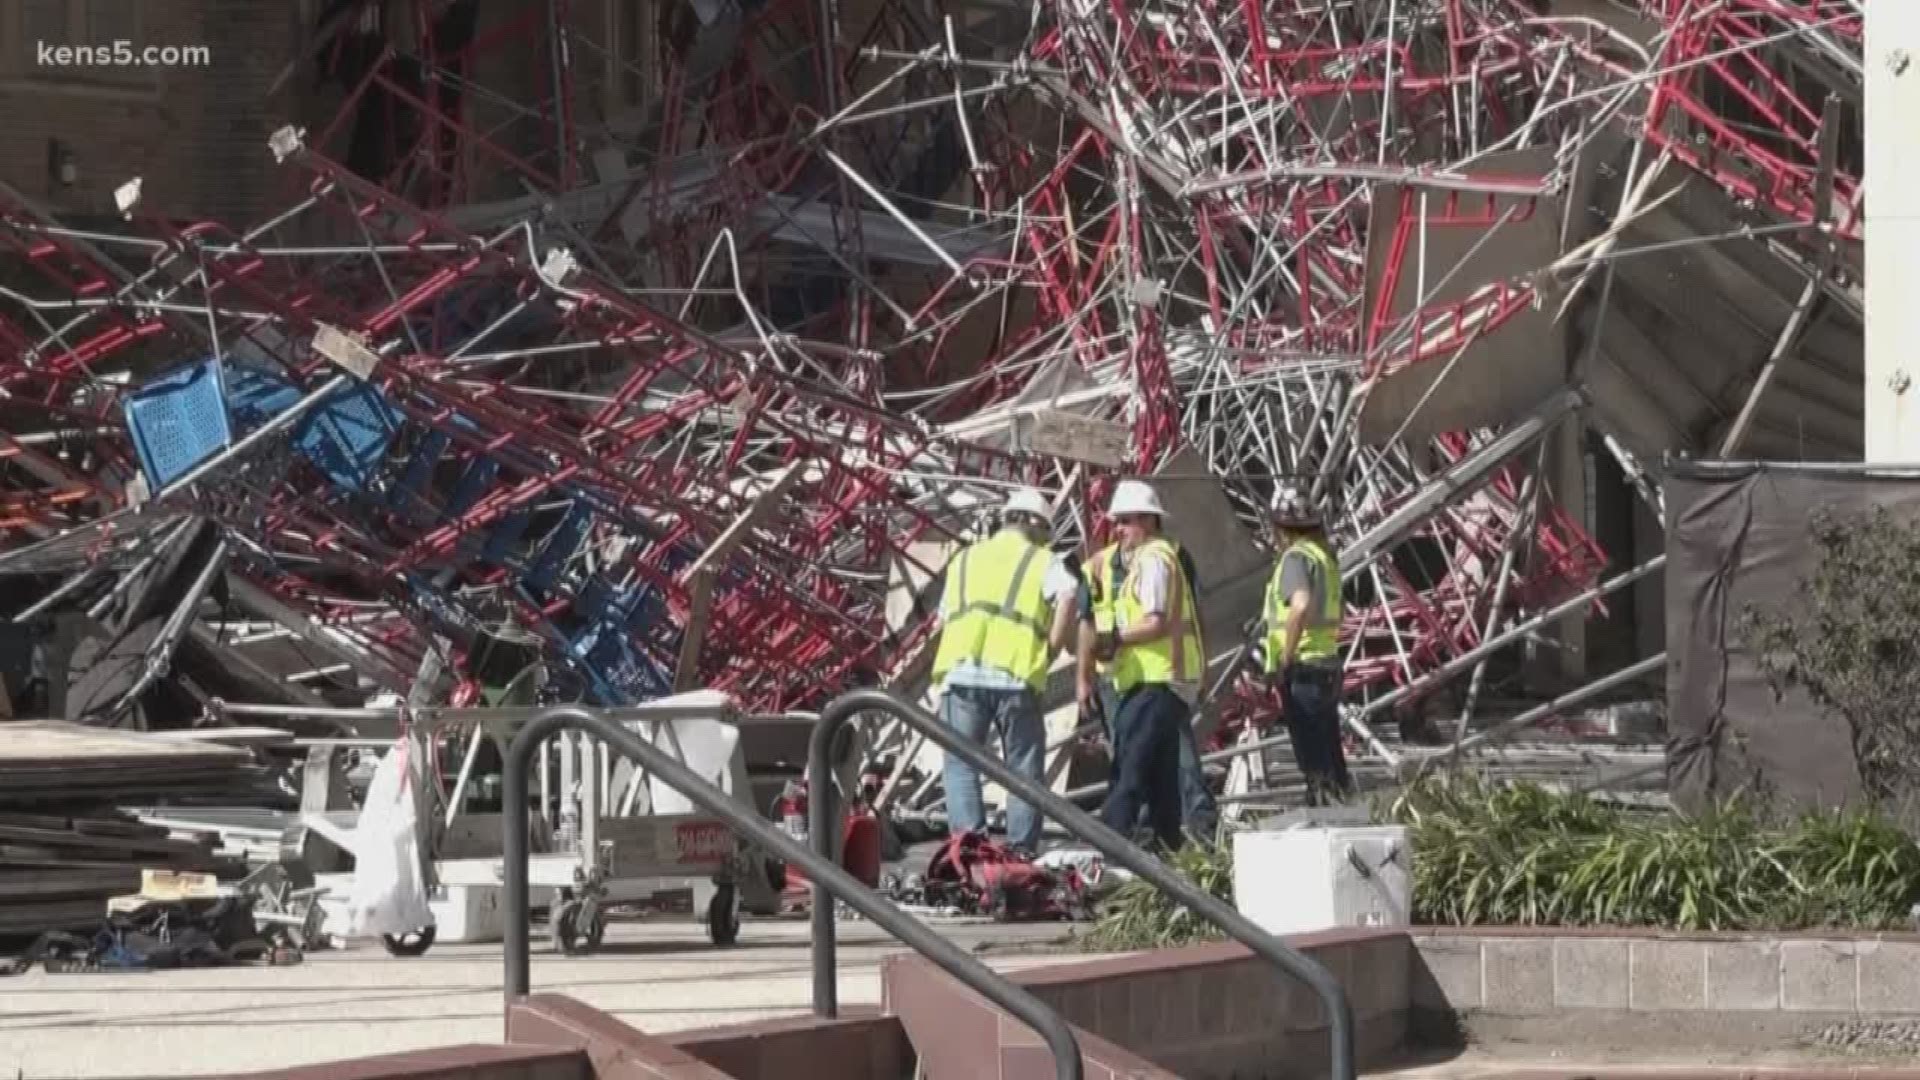 Strong winds knocked over 1 million pounds of scaffolding in downtown San Antonio The massive collapse damaged a church and injured a family of three.